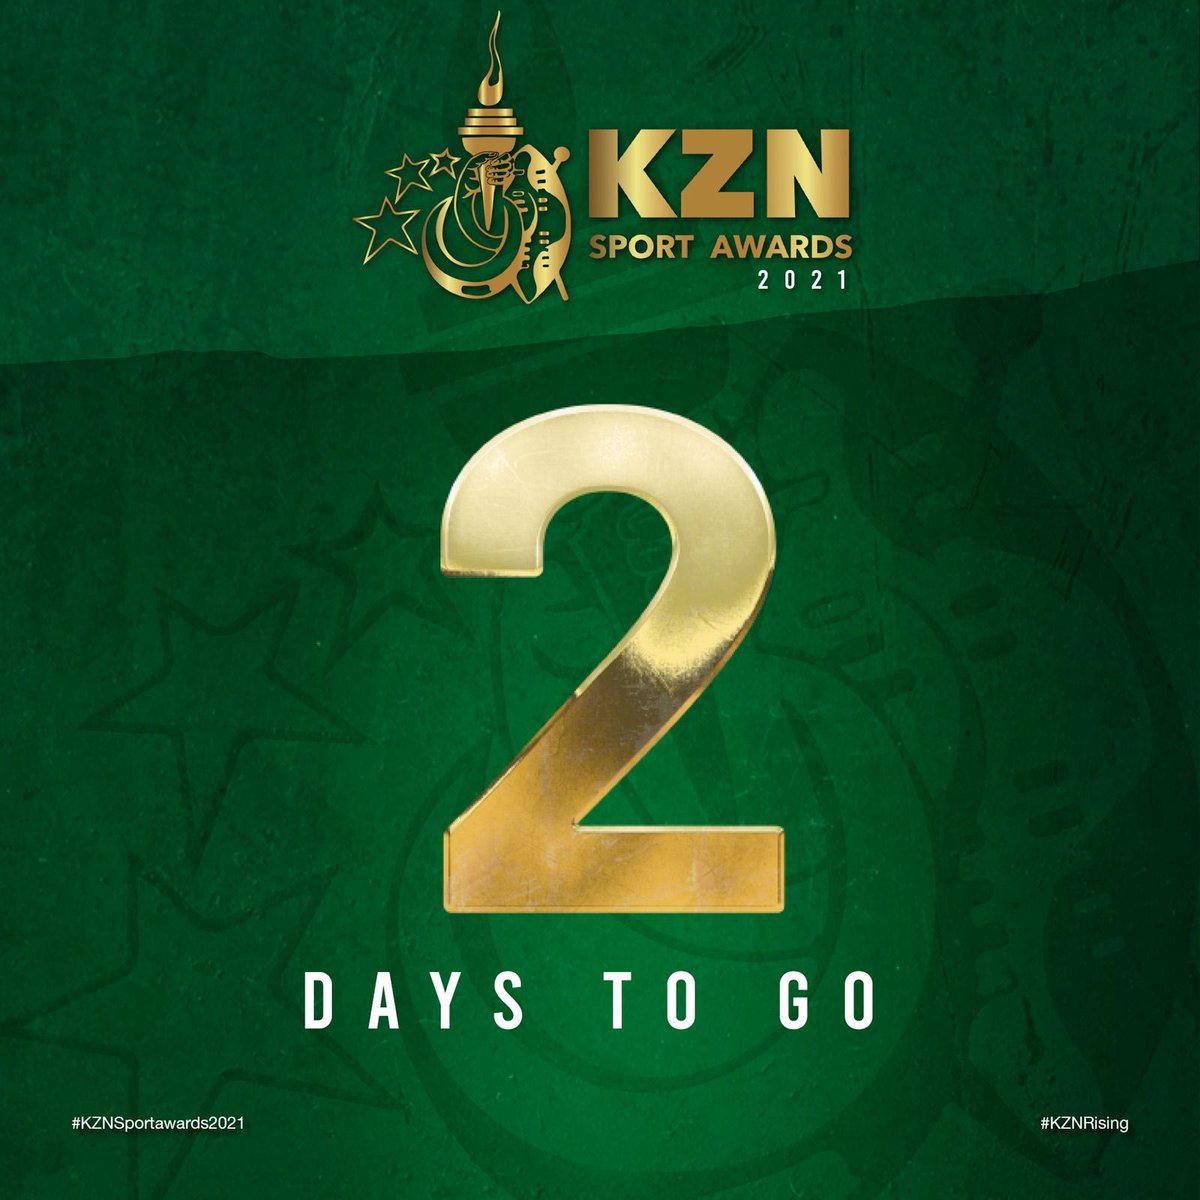 🚨 2 MORE DAYS TILL THE 2021 KZN SPORT AWARDS🚨 Get Ready to See the Rest of the Nominees for the other categories 👏🏼👏🏼👏🏼💪🏼💪🏼💪🏼 Uthi ubani umpetha, who’s your champ? #OmpethaBethu #OurChampions #winningAndActiveProvince